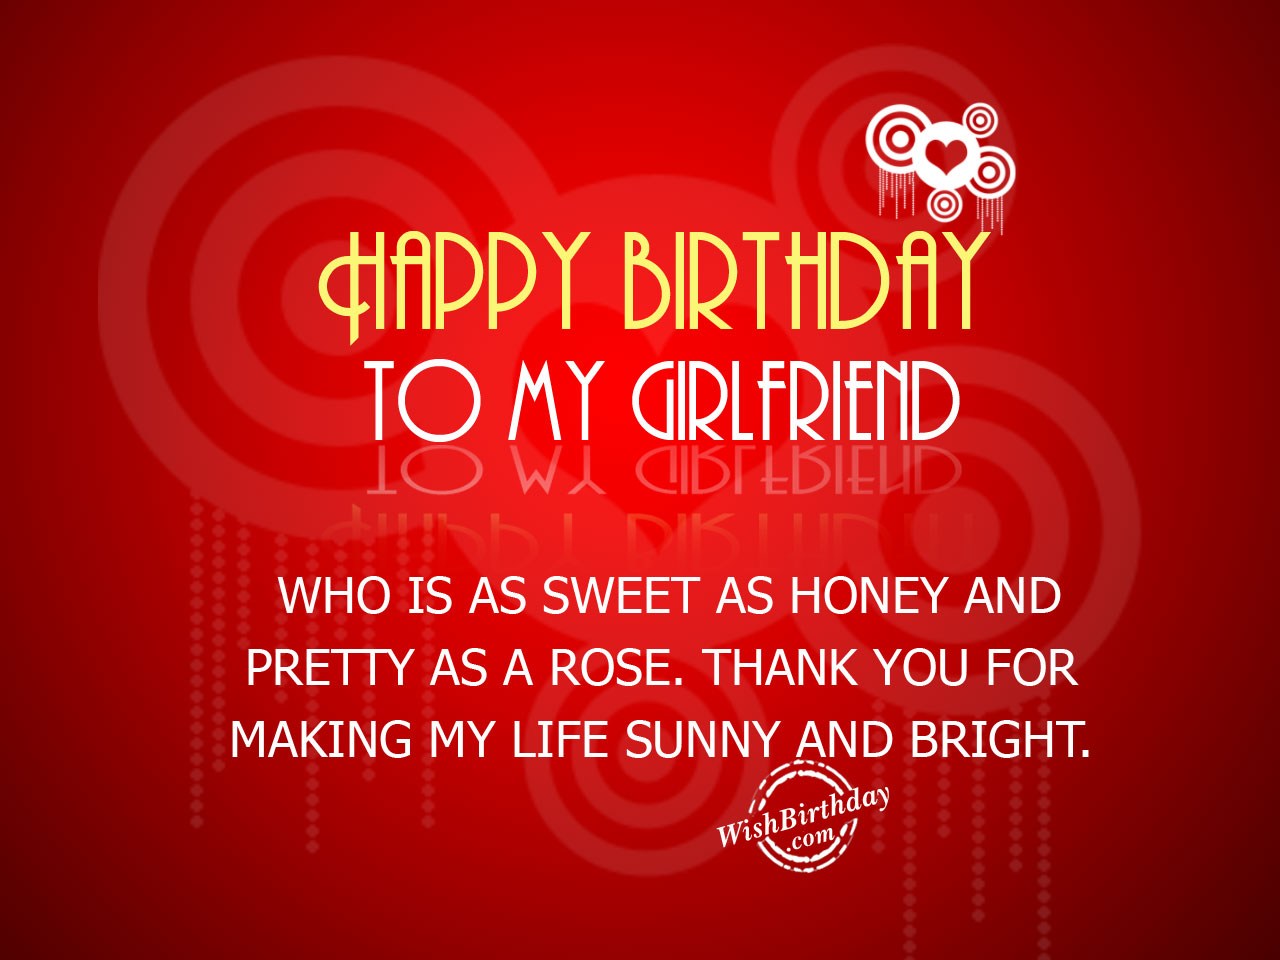 Birthday Wishes For Girlfriend - Birthday Images, Pictures